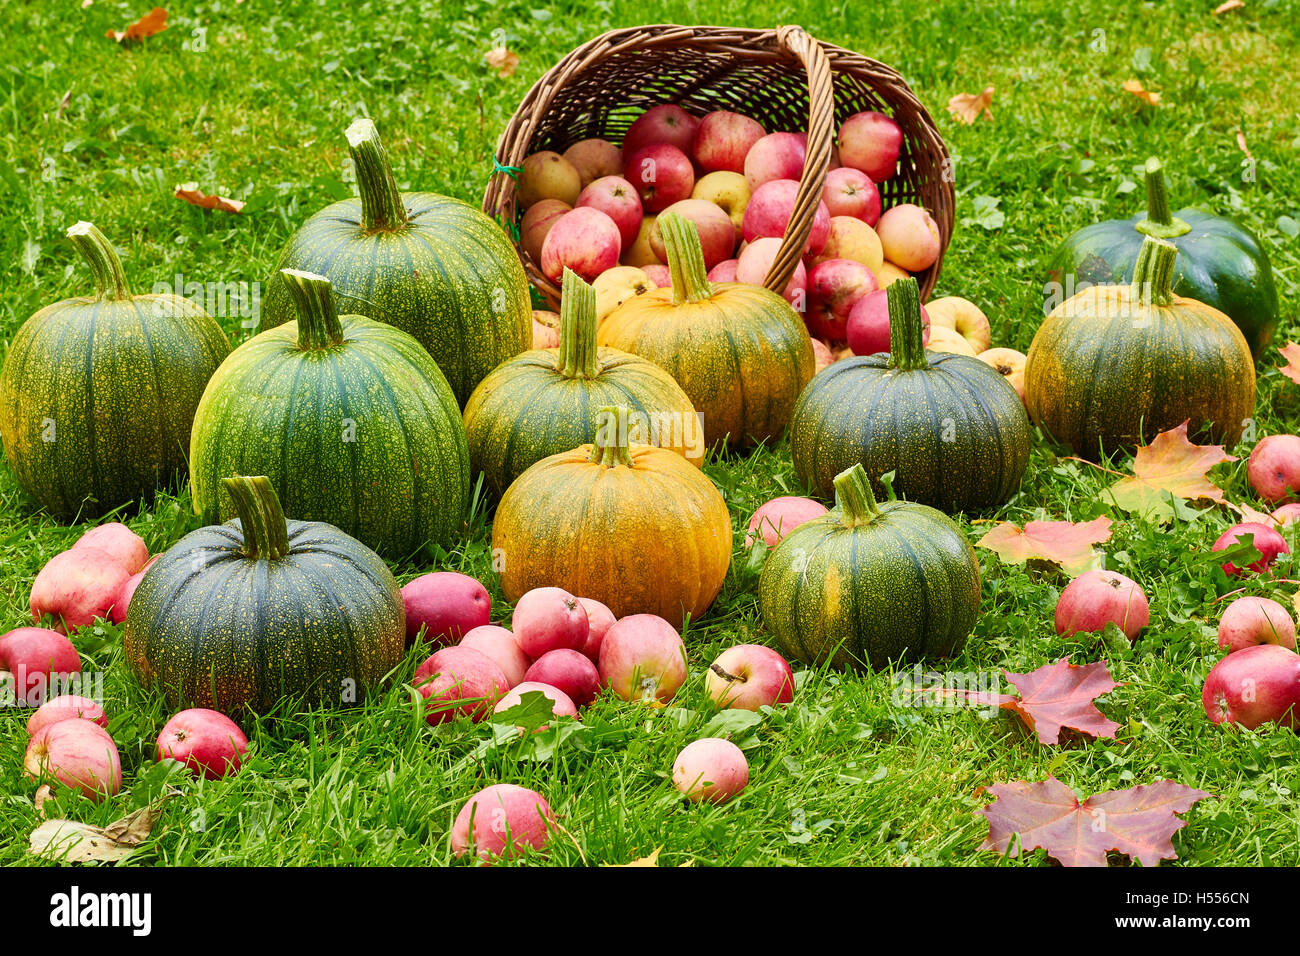 Freshly harvested pumpkins and apples in autumn garden Stock Photo